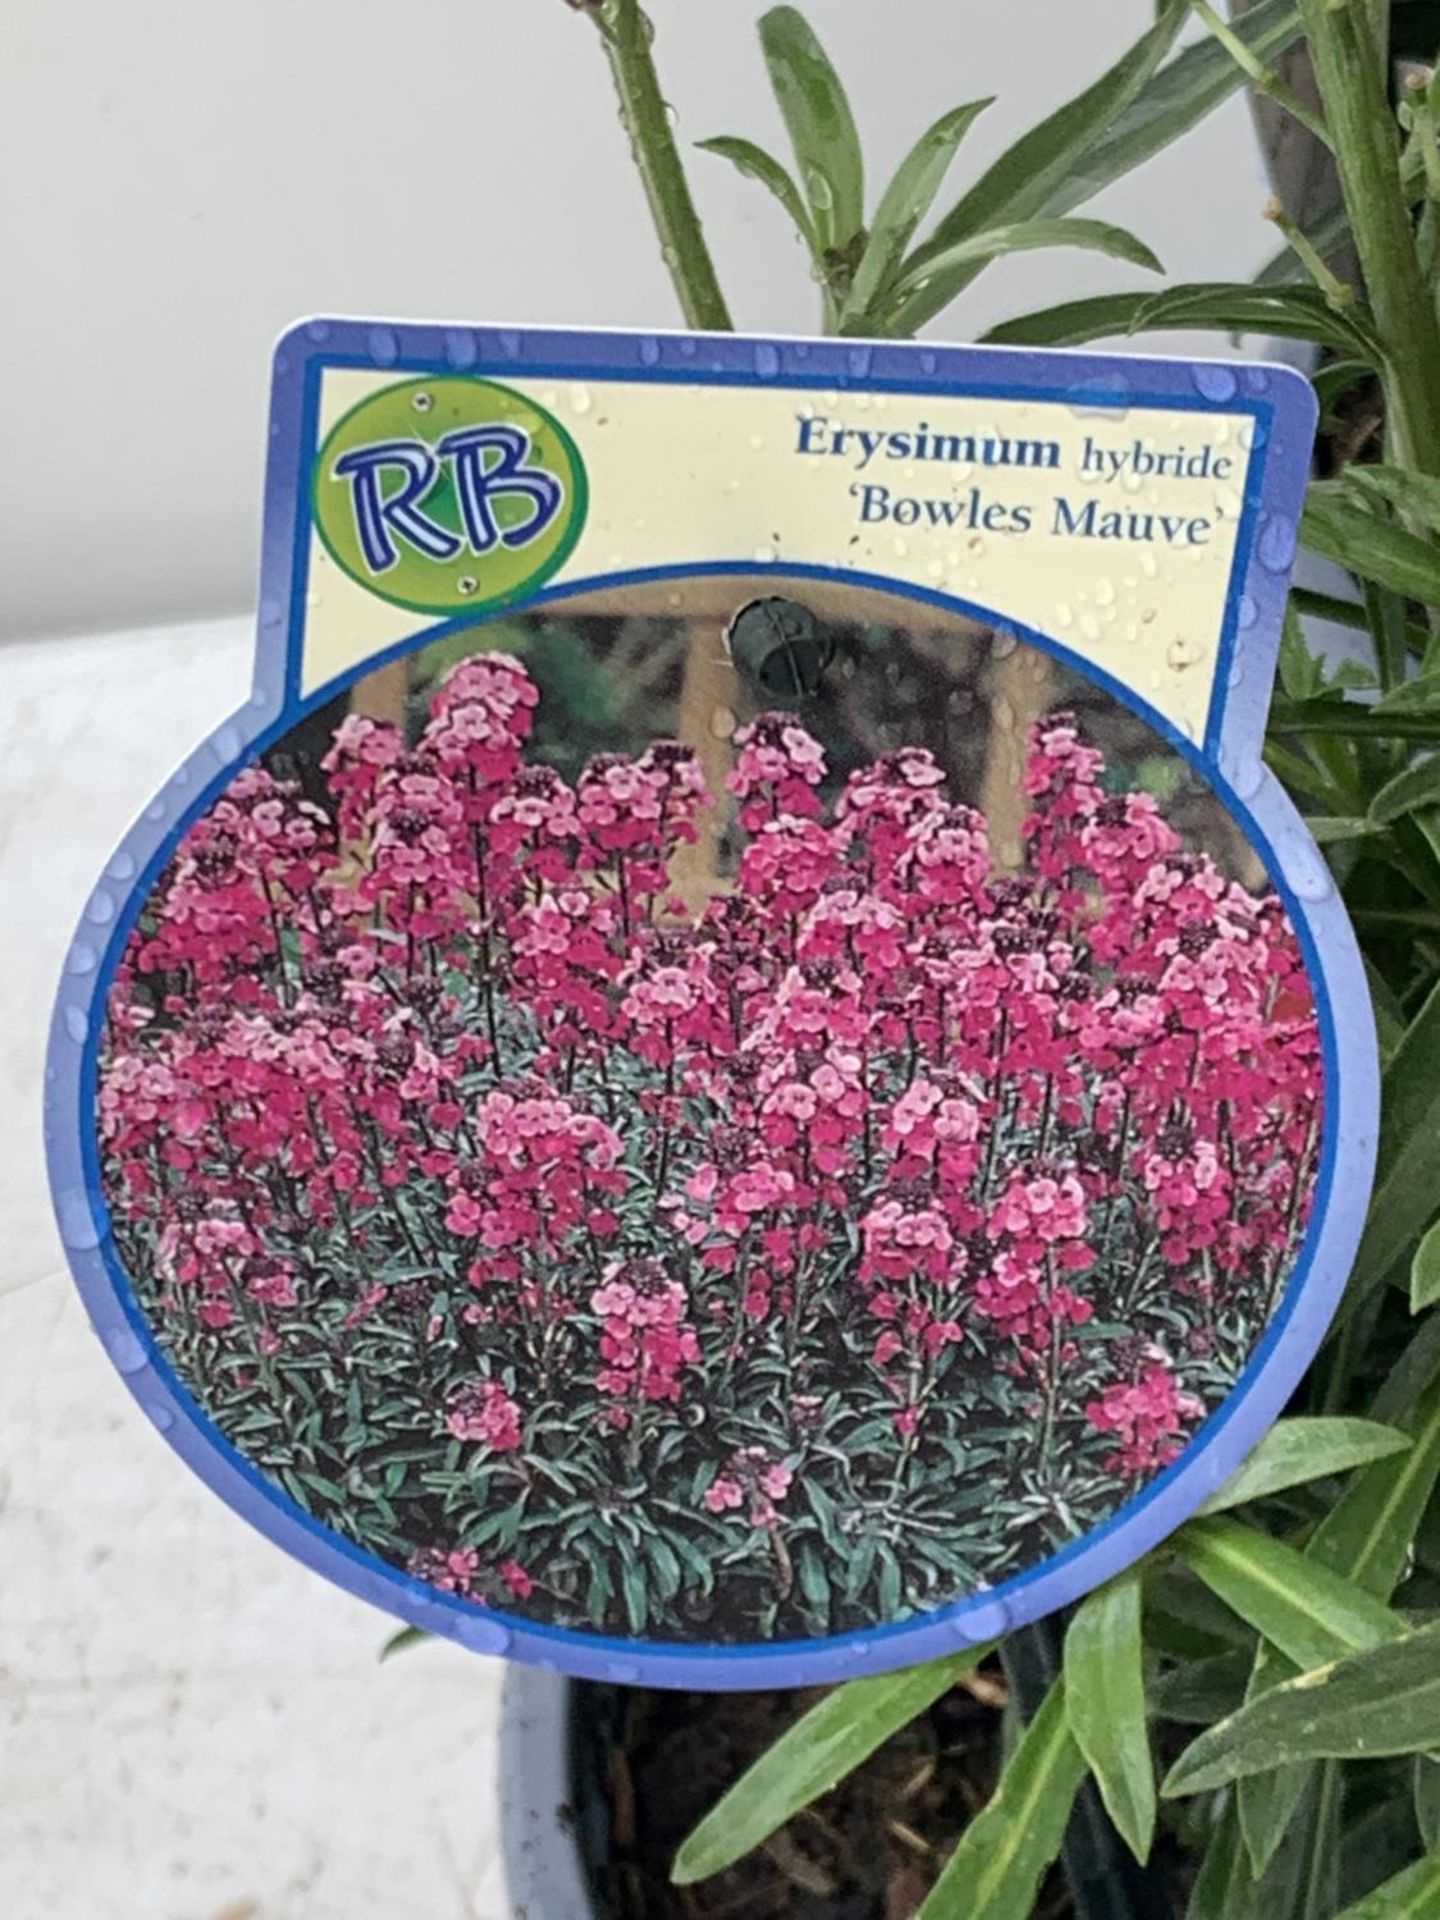 SIX ERYSIMUM BOWLES MAUVE IN 2 LTR POTS 40-50CM TALL TO BE SOLD FOR THE SIX PLUS VAT - Image 5 of 5